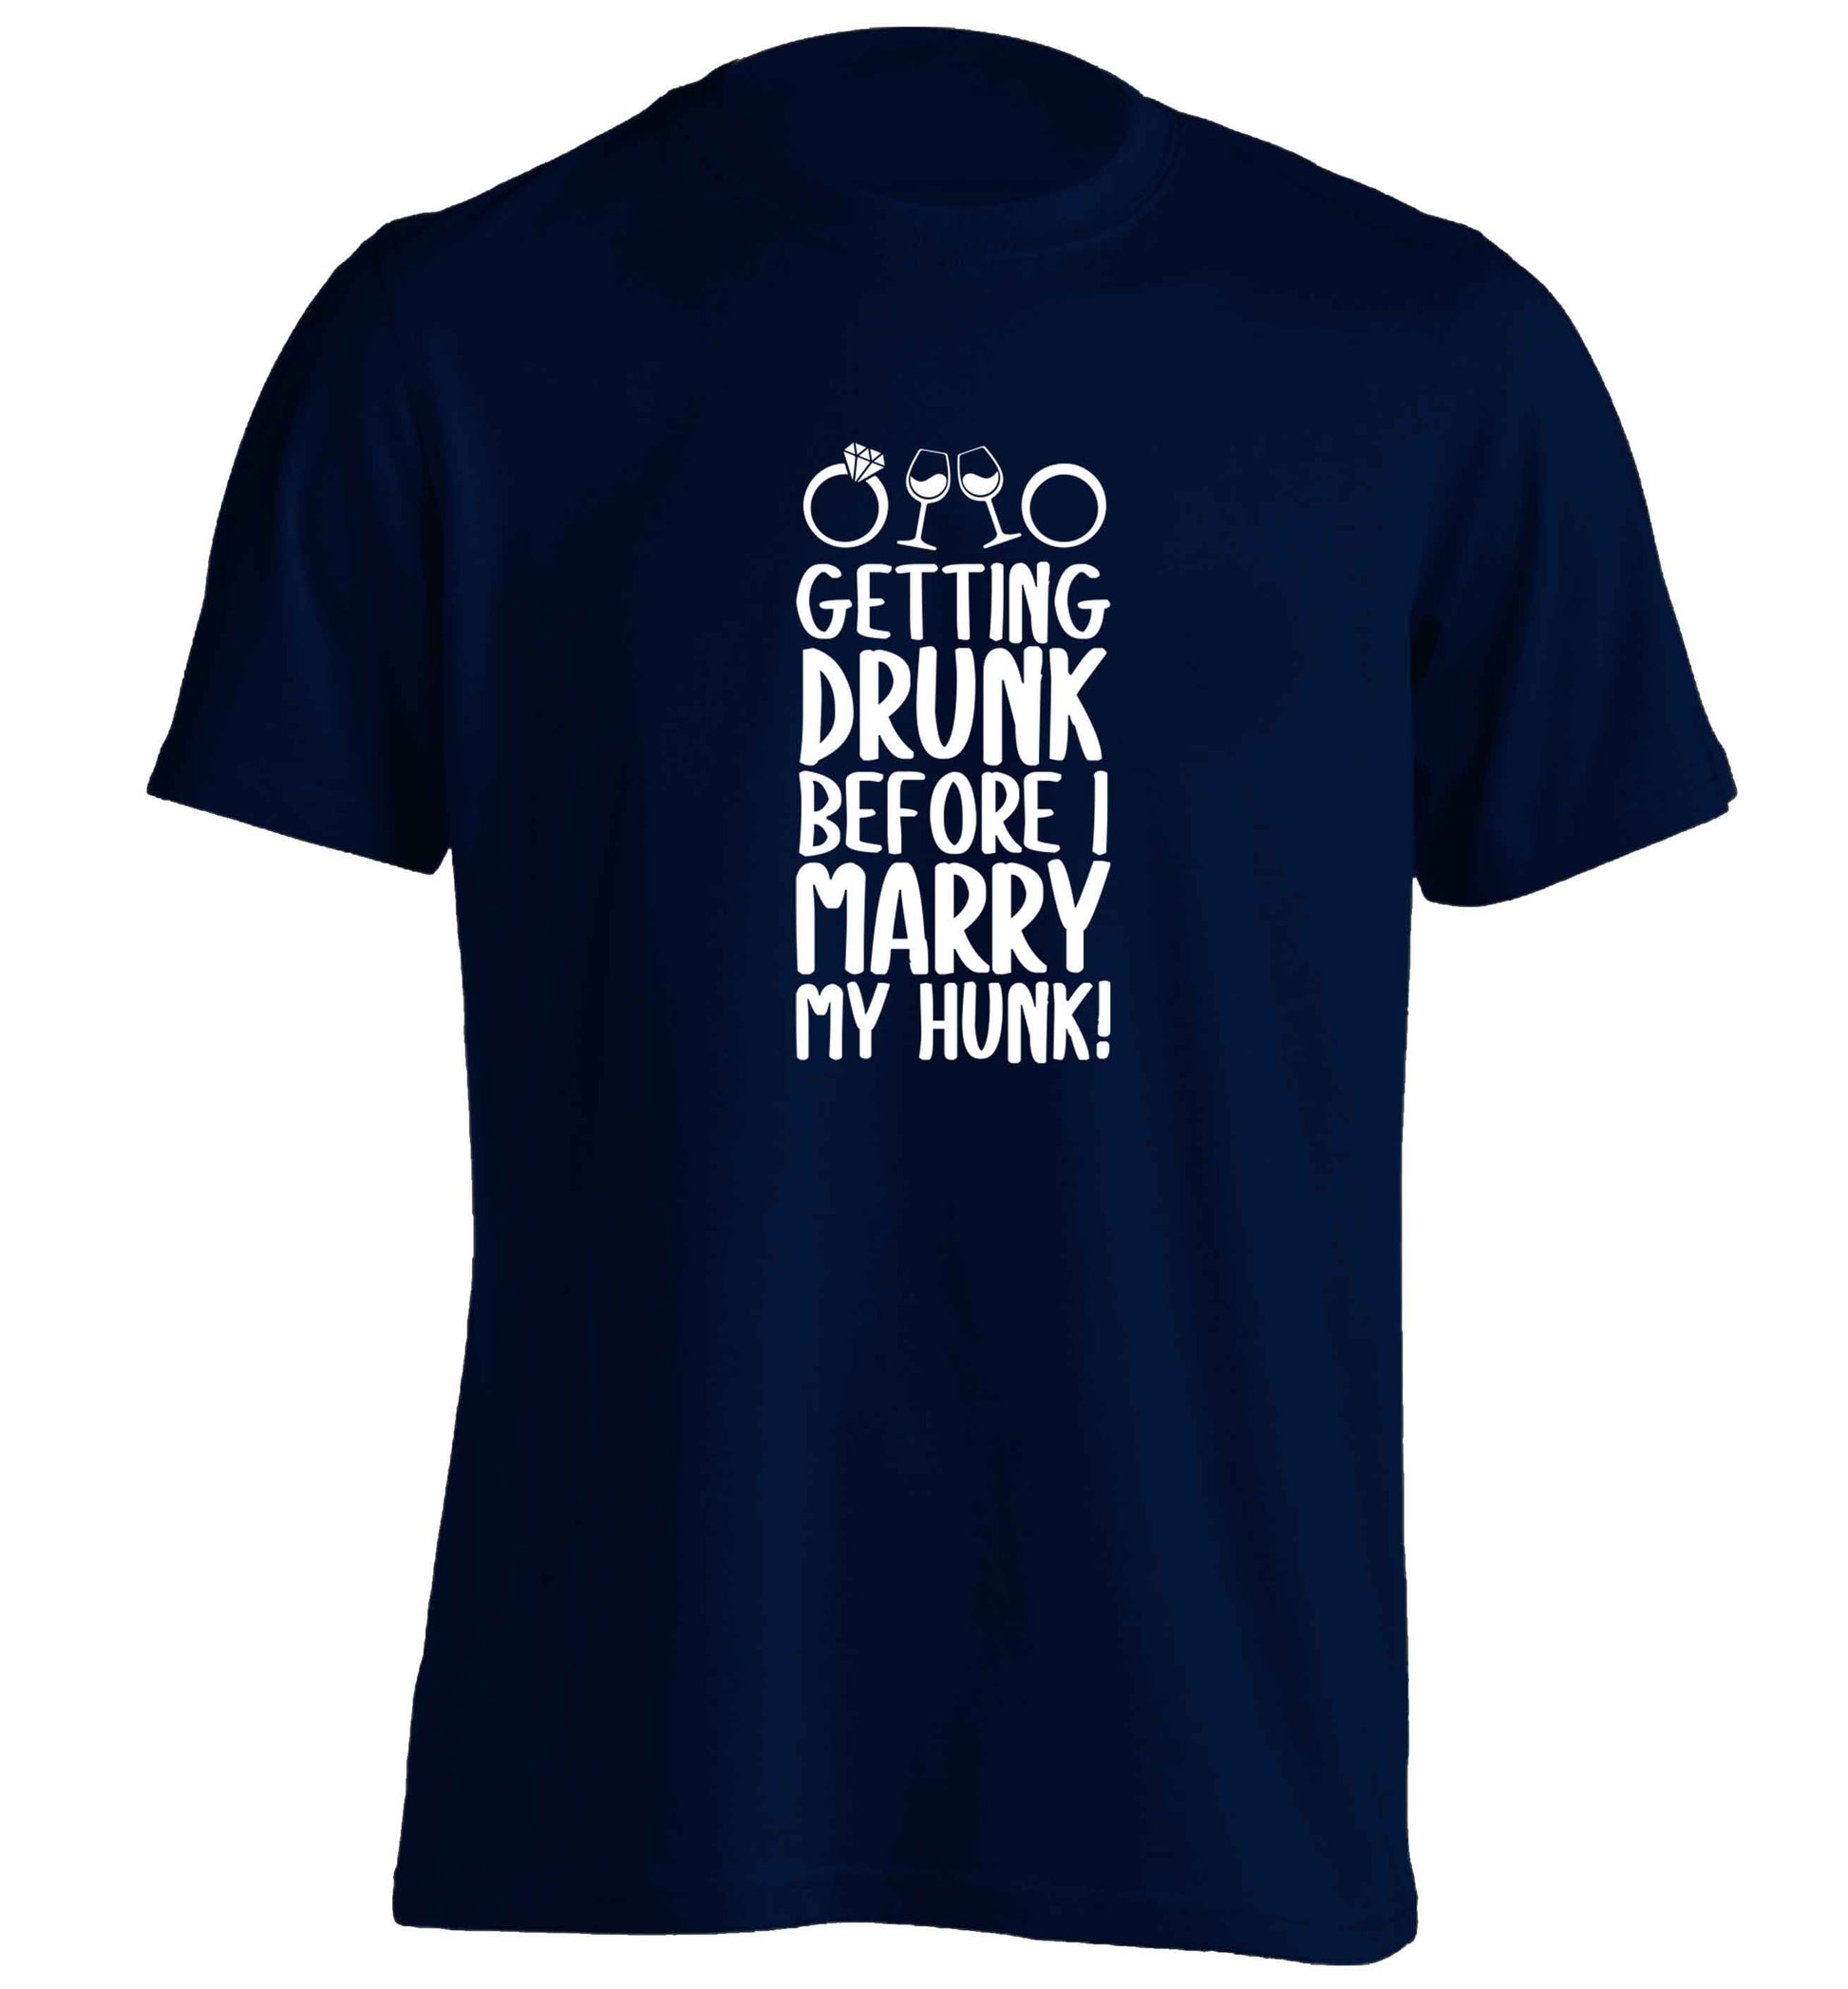 Getting drunk before I marry my hunk adults unisex navy Tshirt 2XL